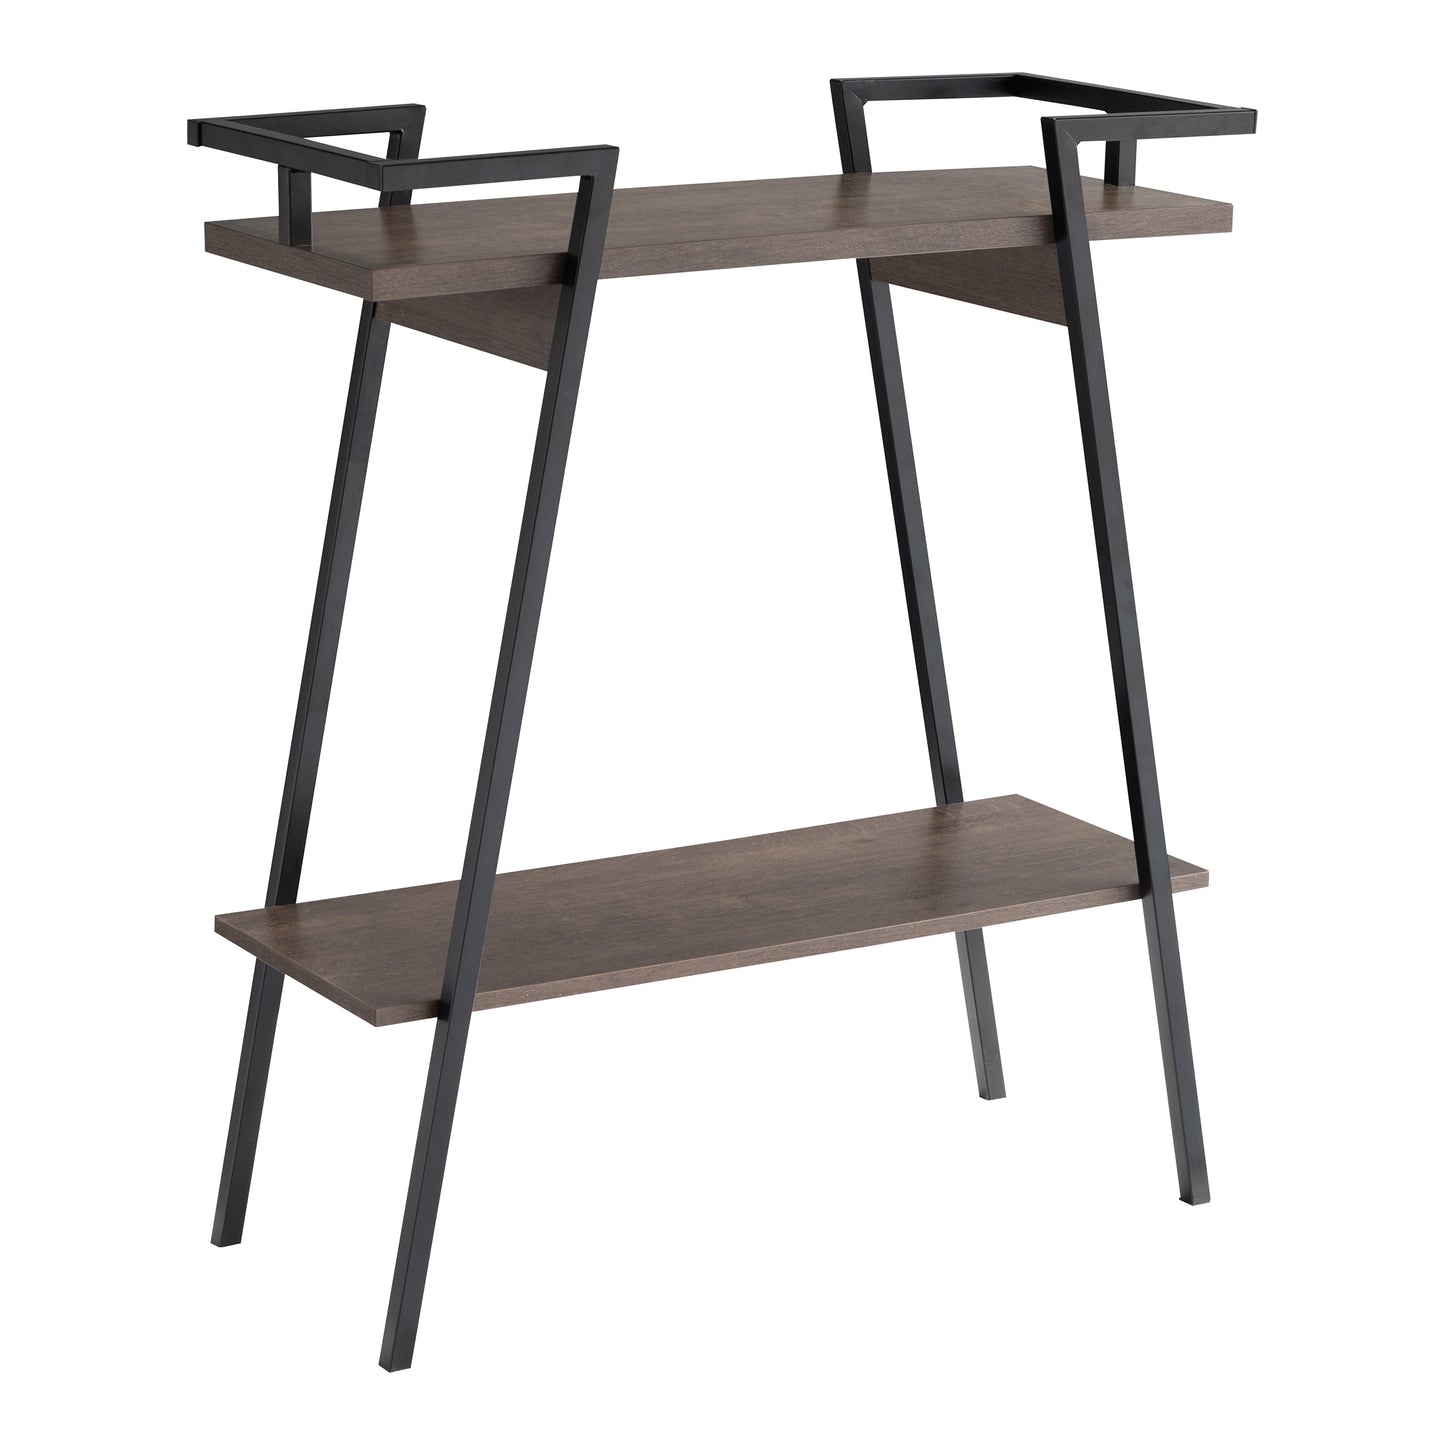 Right angled urban industrial walnut oak and black two-shelf geometric console table on a white background